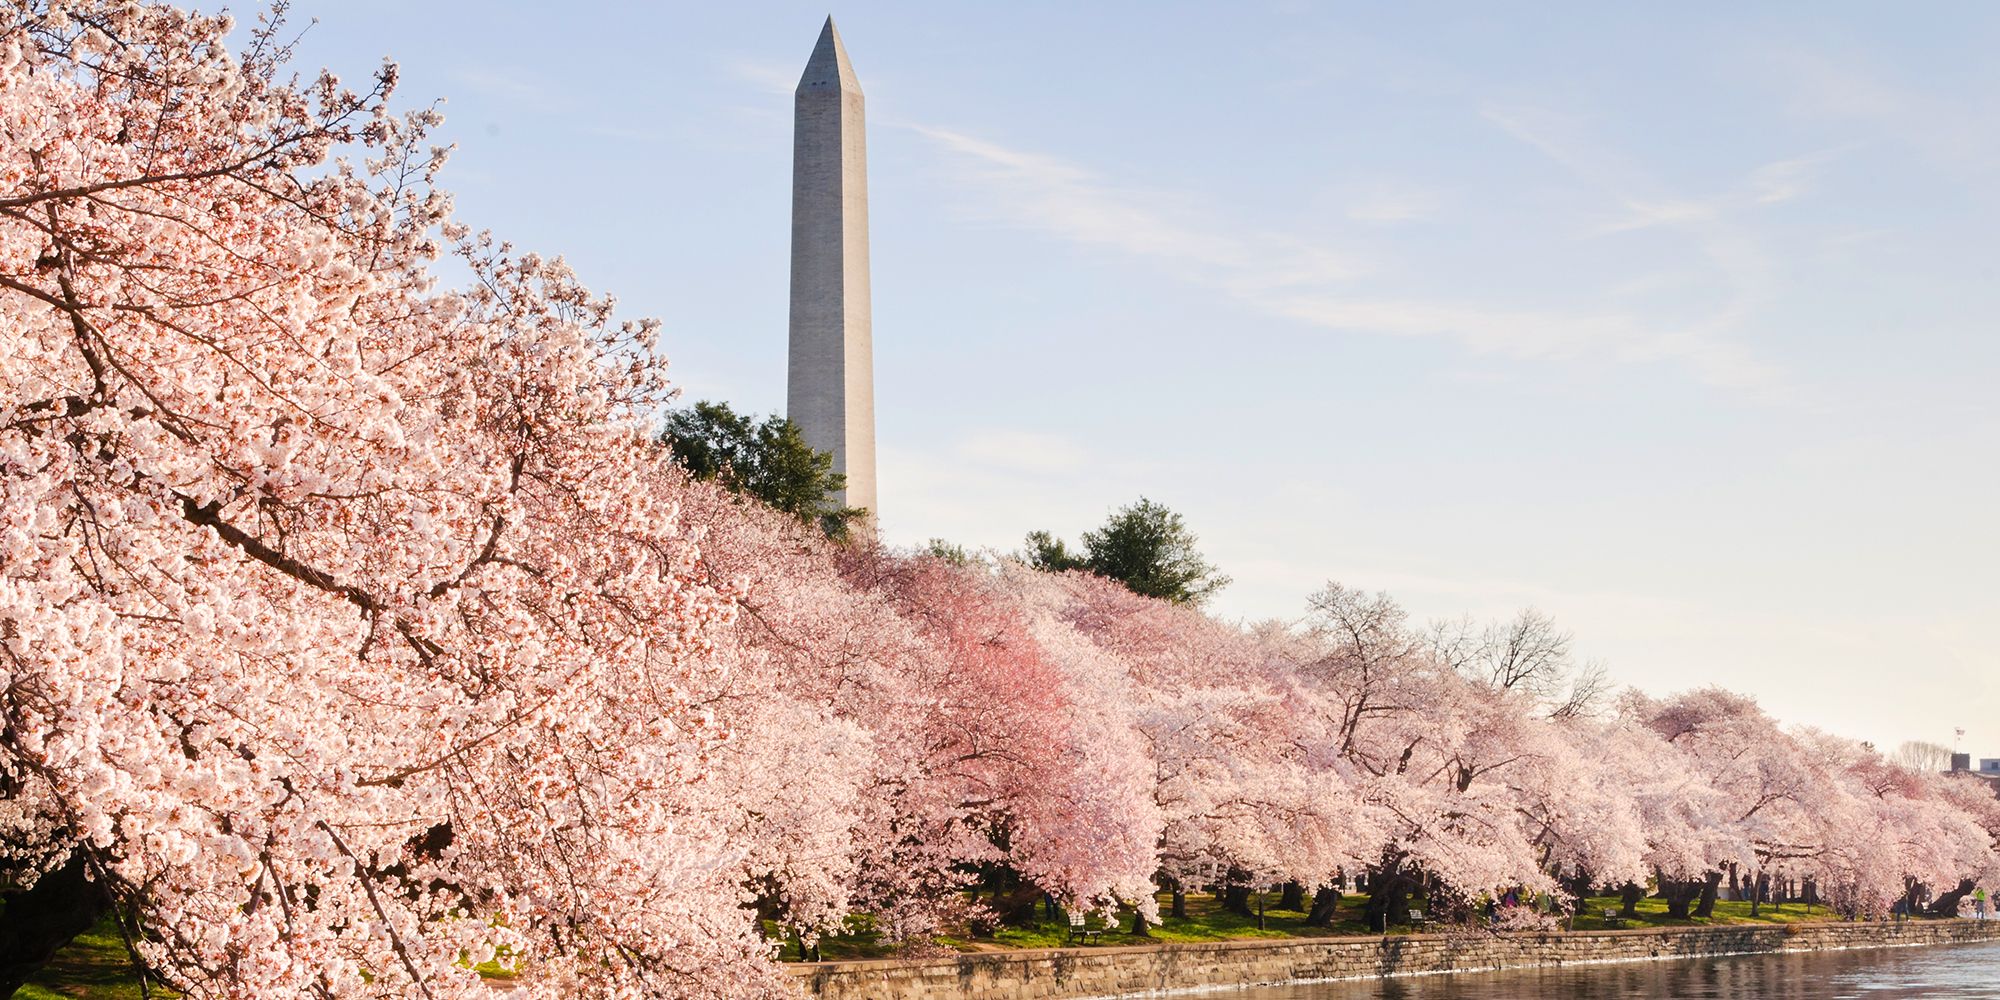 How to Grow Cherry Trees in New Jersey